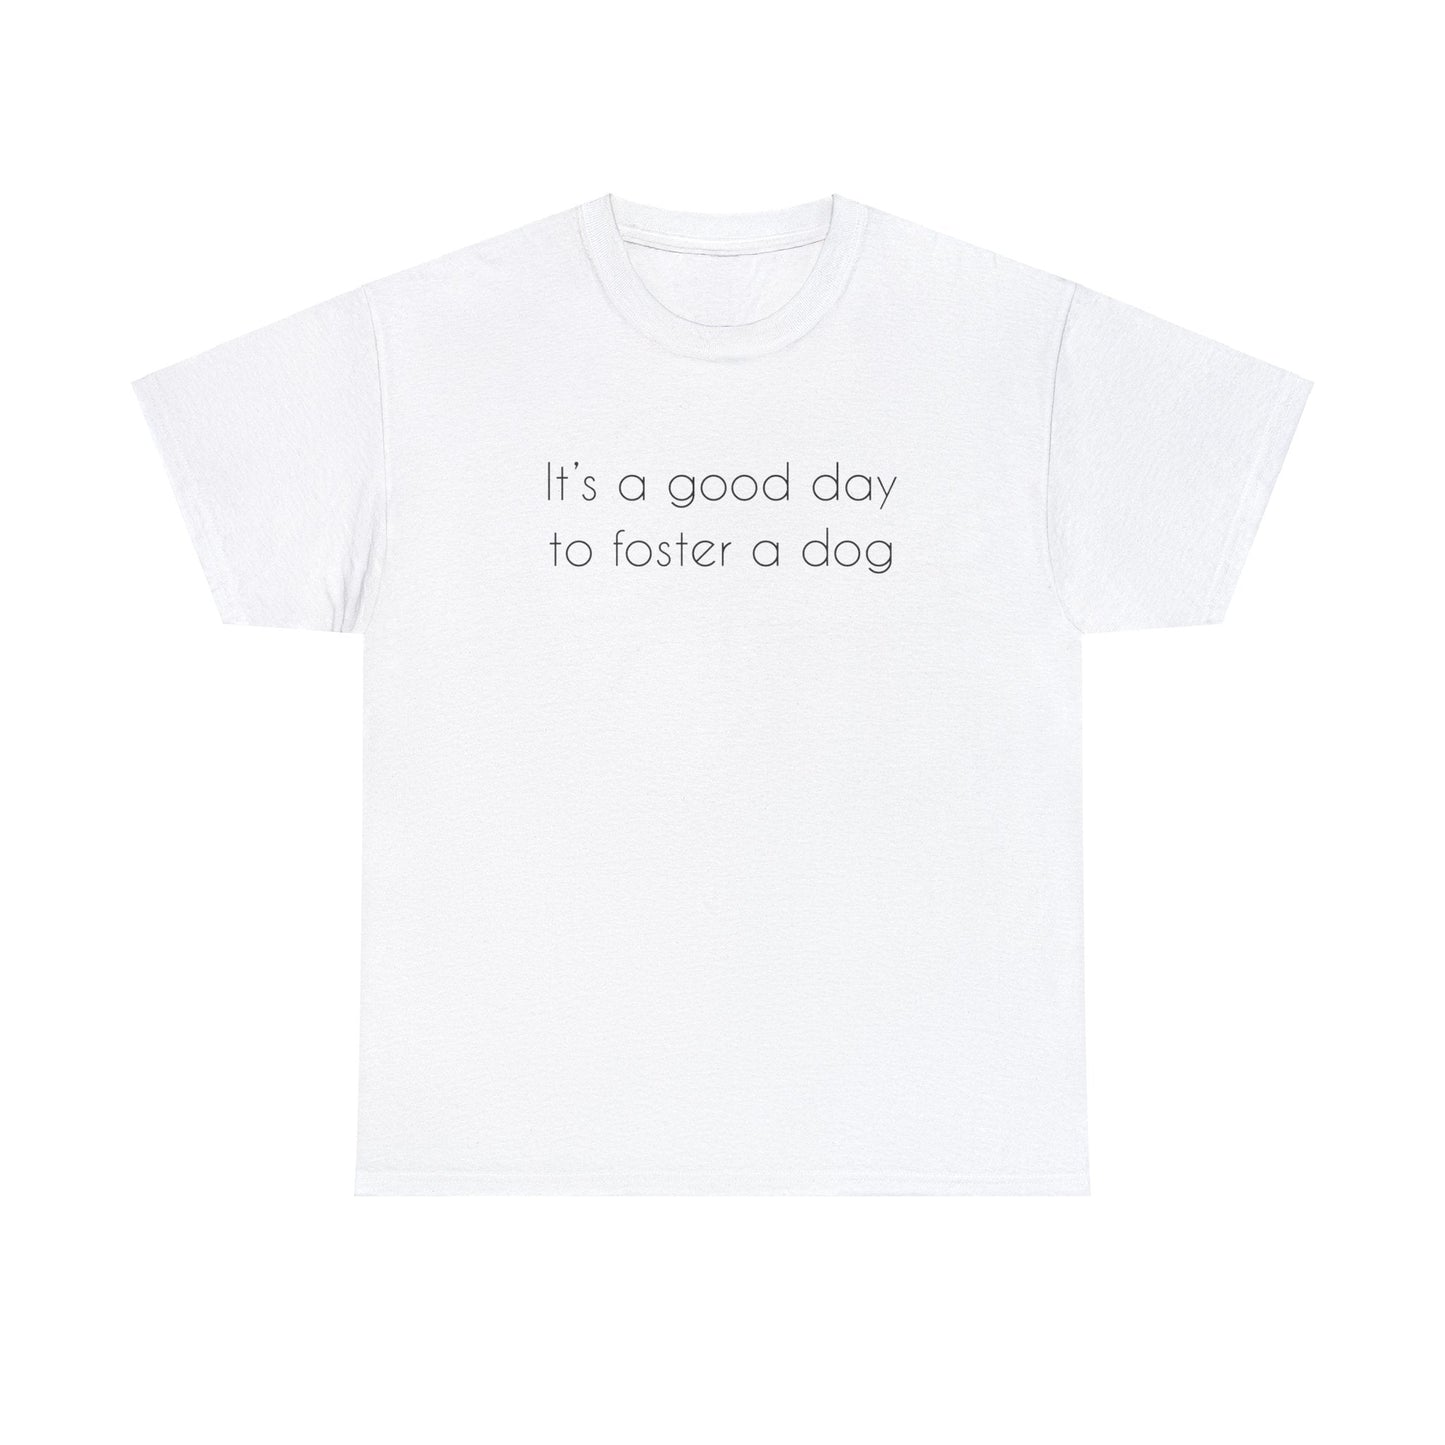 It's A Good Day To Foster A Dog | Text Tees - Detezi Designs-14985995053996694087